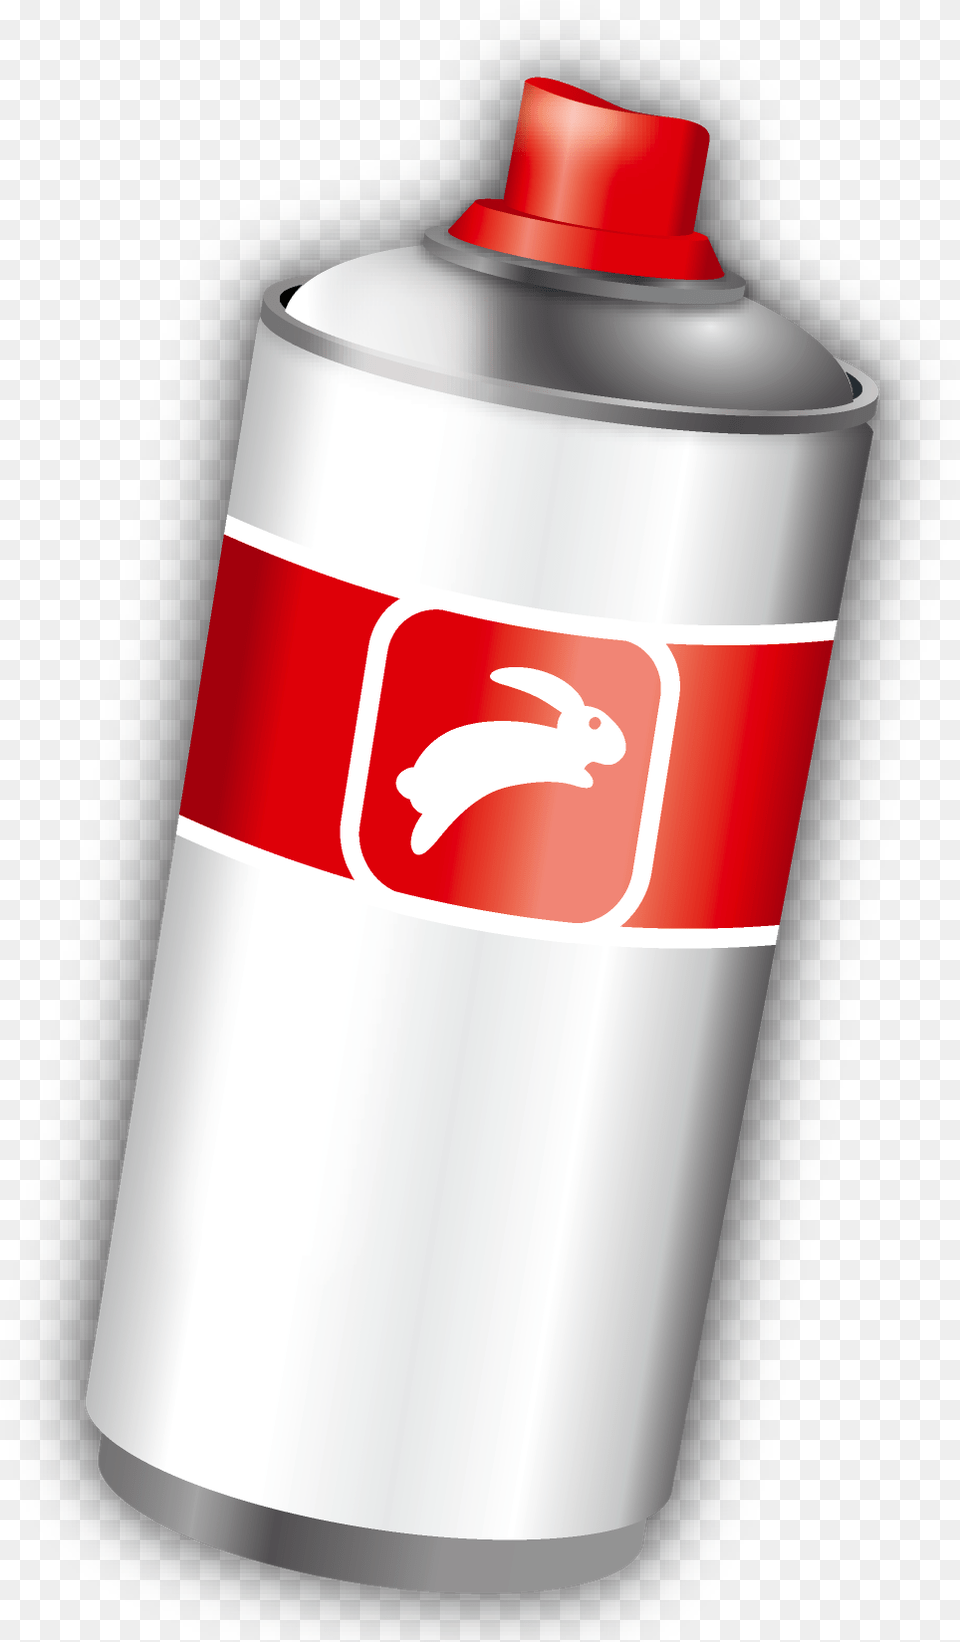 Spray Can Image Spray Paint Can Transparent Background, Tin, Spray Can, Bottle, Shaker Free Png